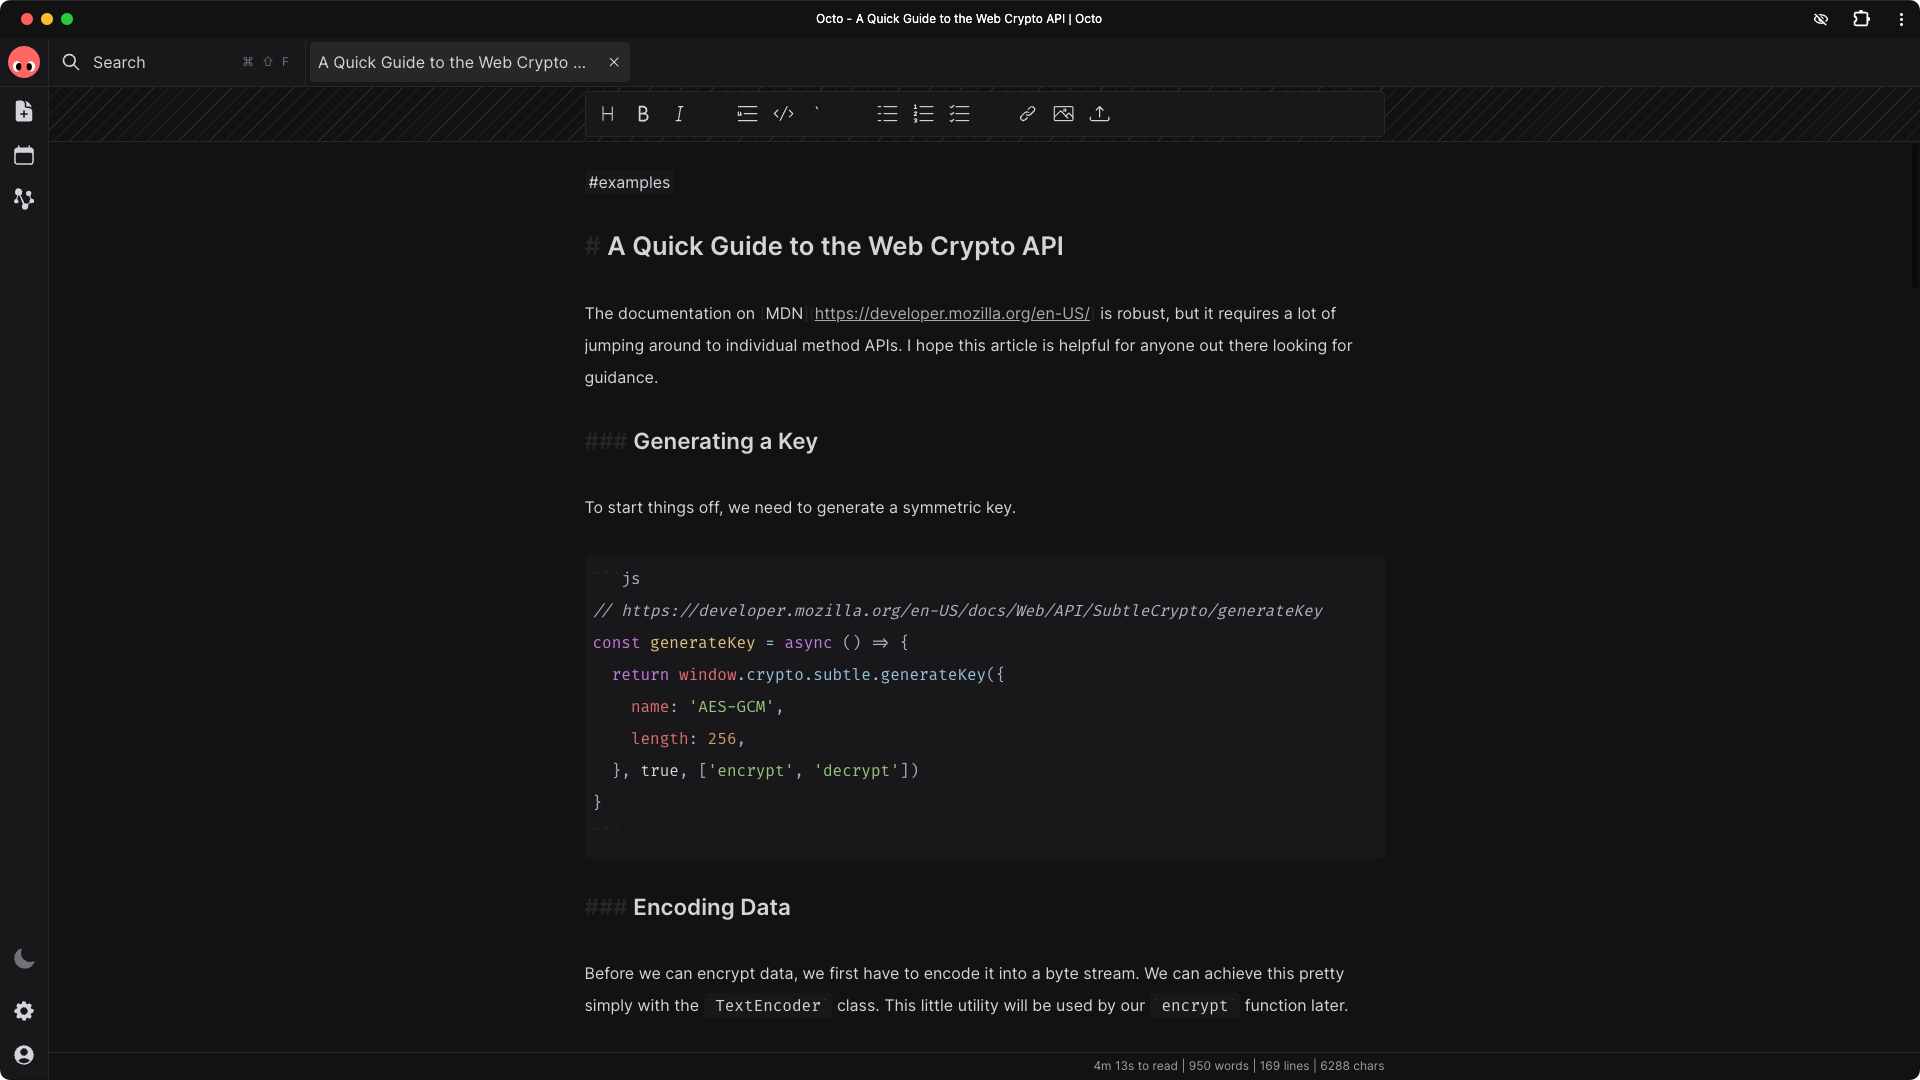 The powerful web-based, responsive note-taking app, Octo, with an open markdown document being edited.